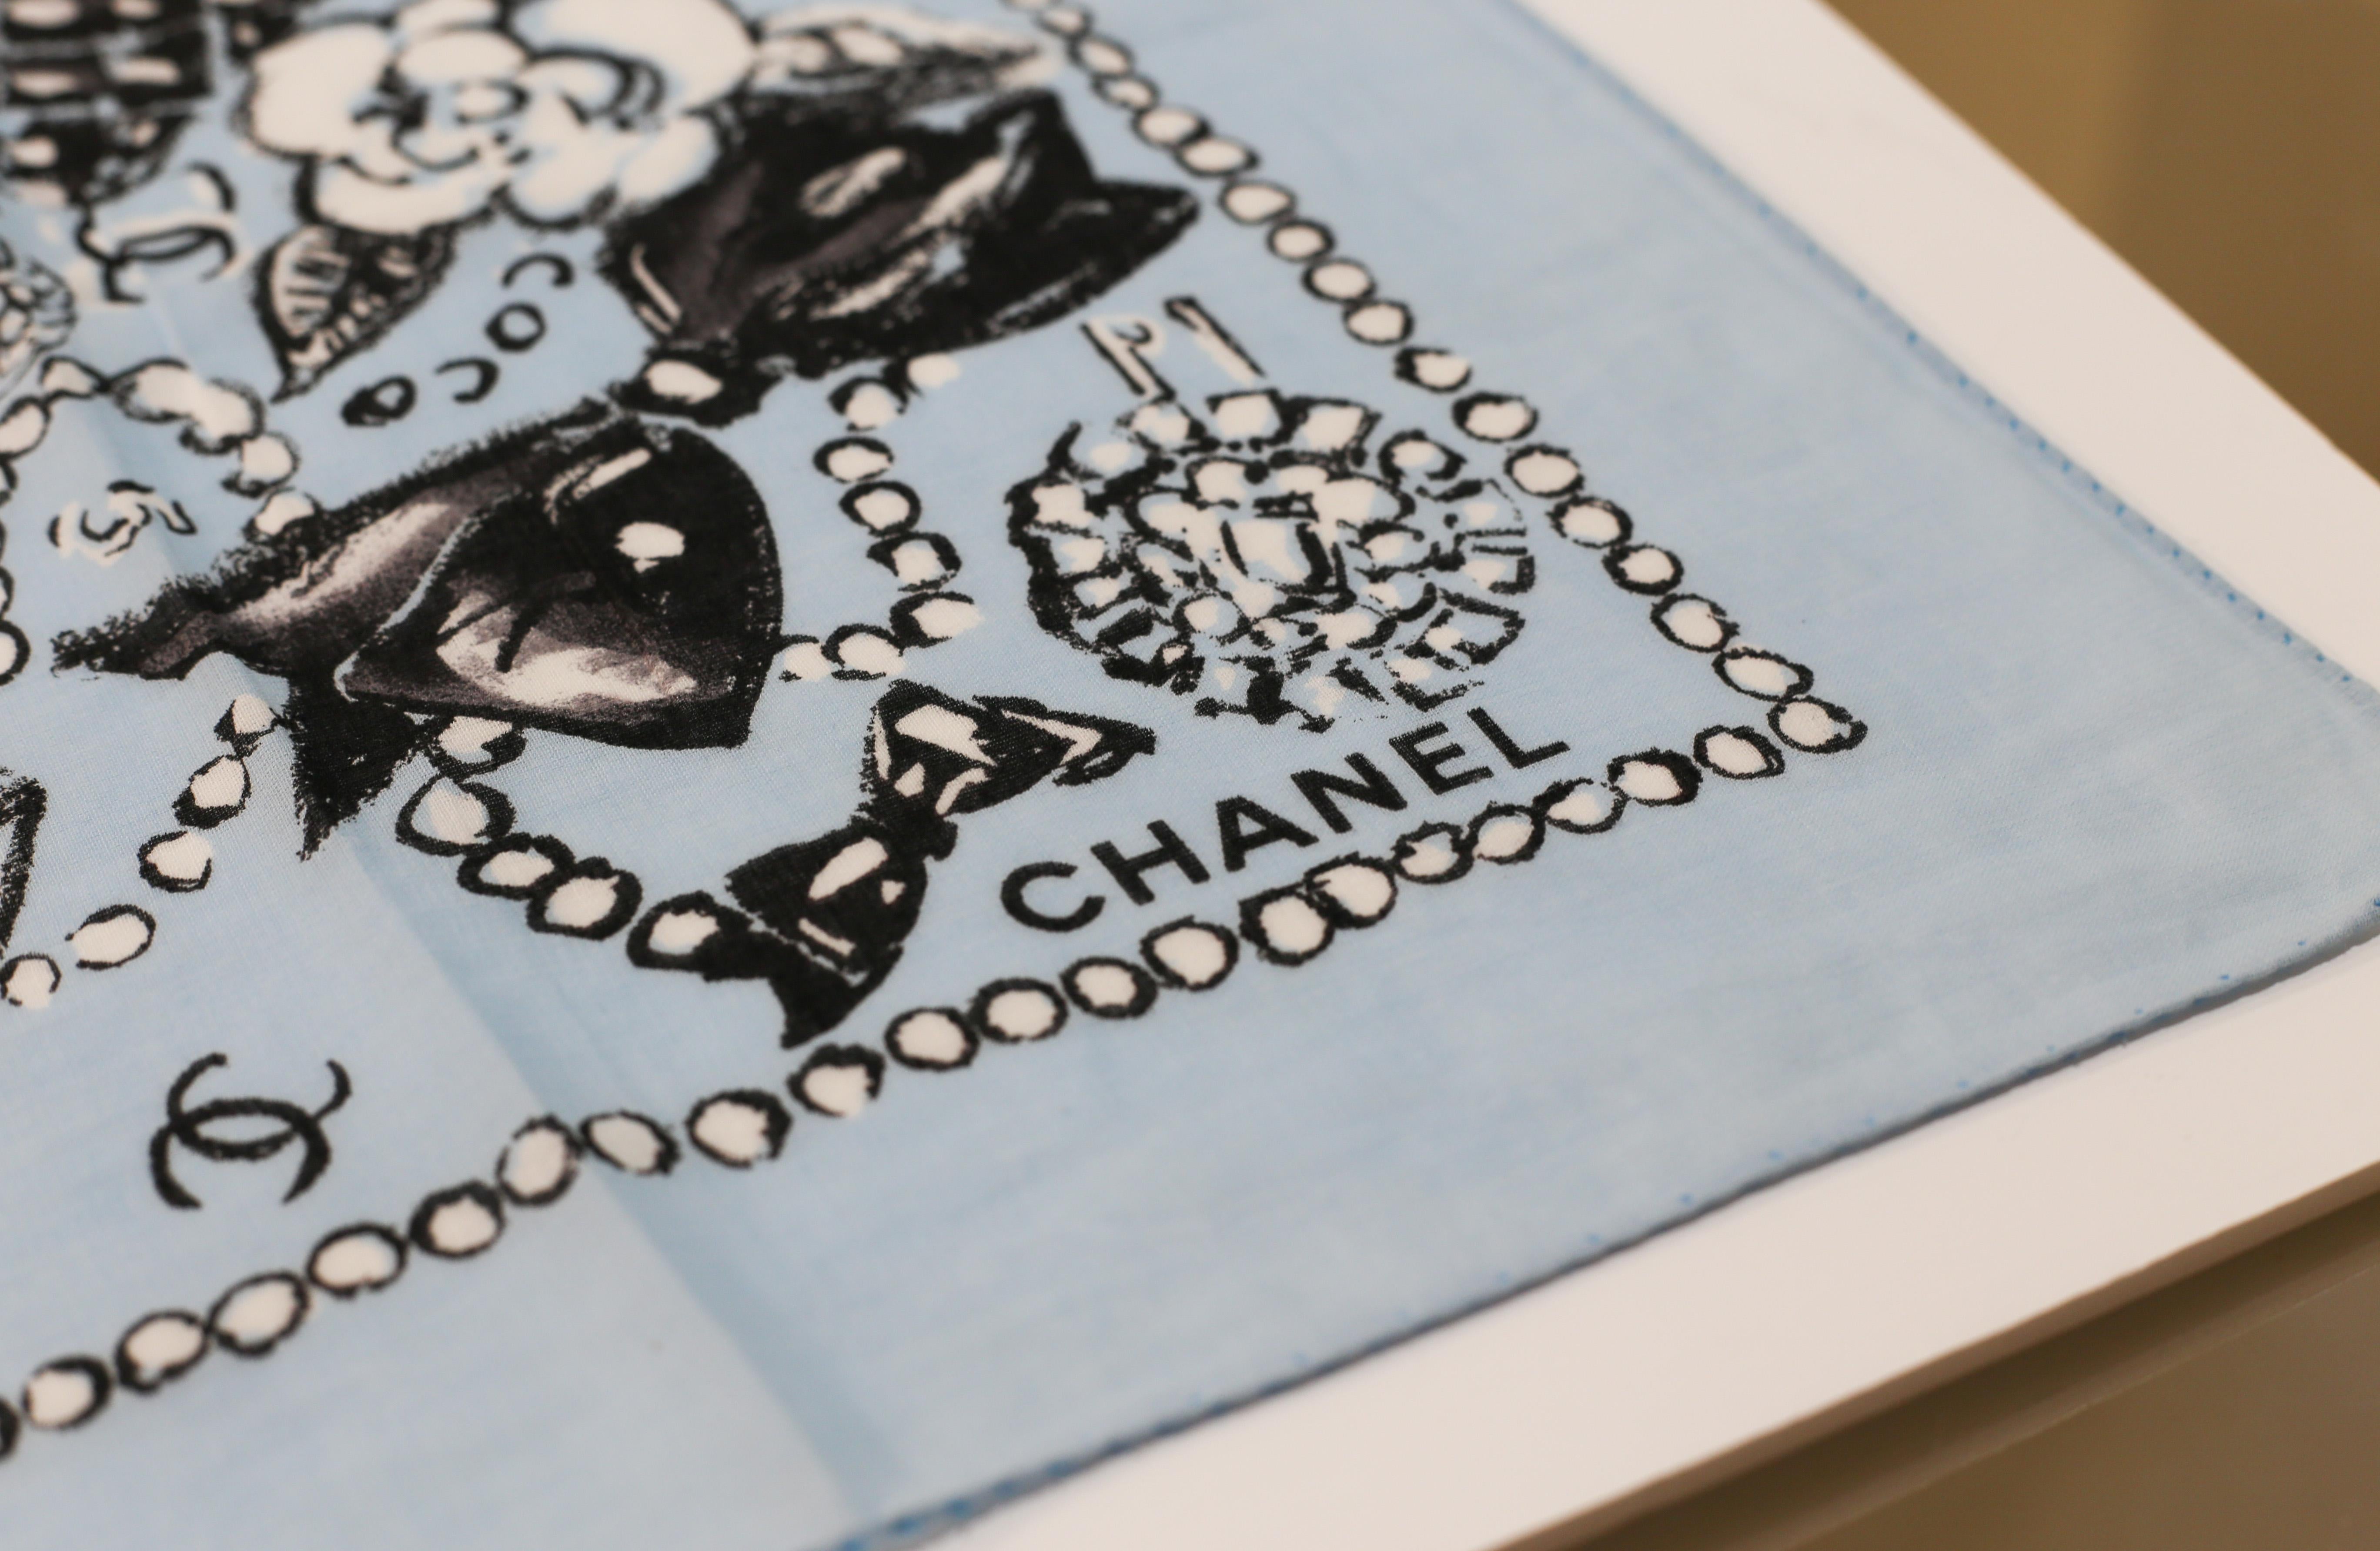 CHANEL Pareo Scarf
a stylish cotton beach pareo with Chanel CC logo printed boldly in black and white over bab blue  colour.
Dress to Impress – a ‘MUST-HAVE’ Chanel accessory in your wardrobe to be worn in many ways and style! ‘Chanel is above all